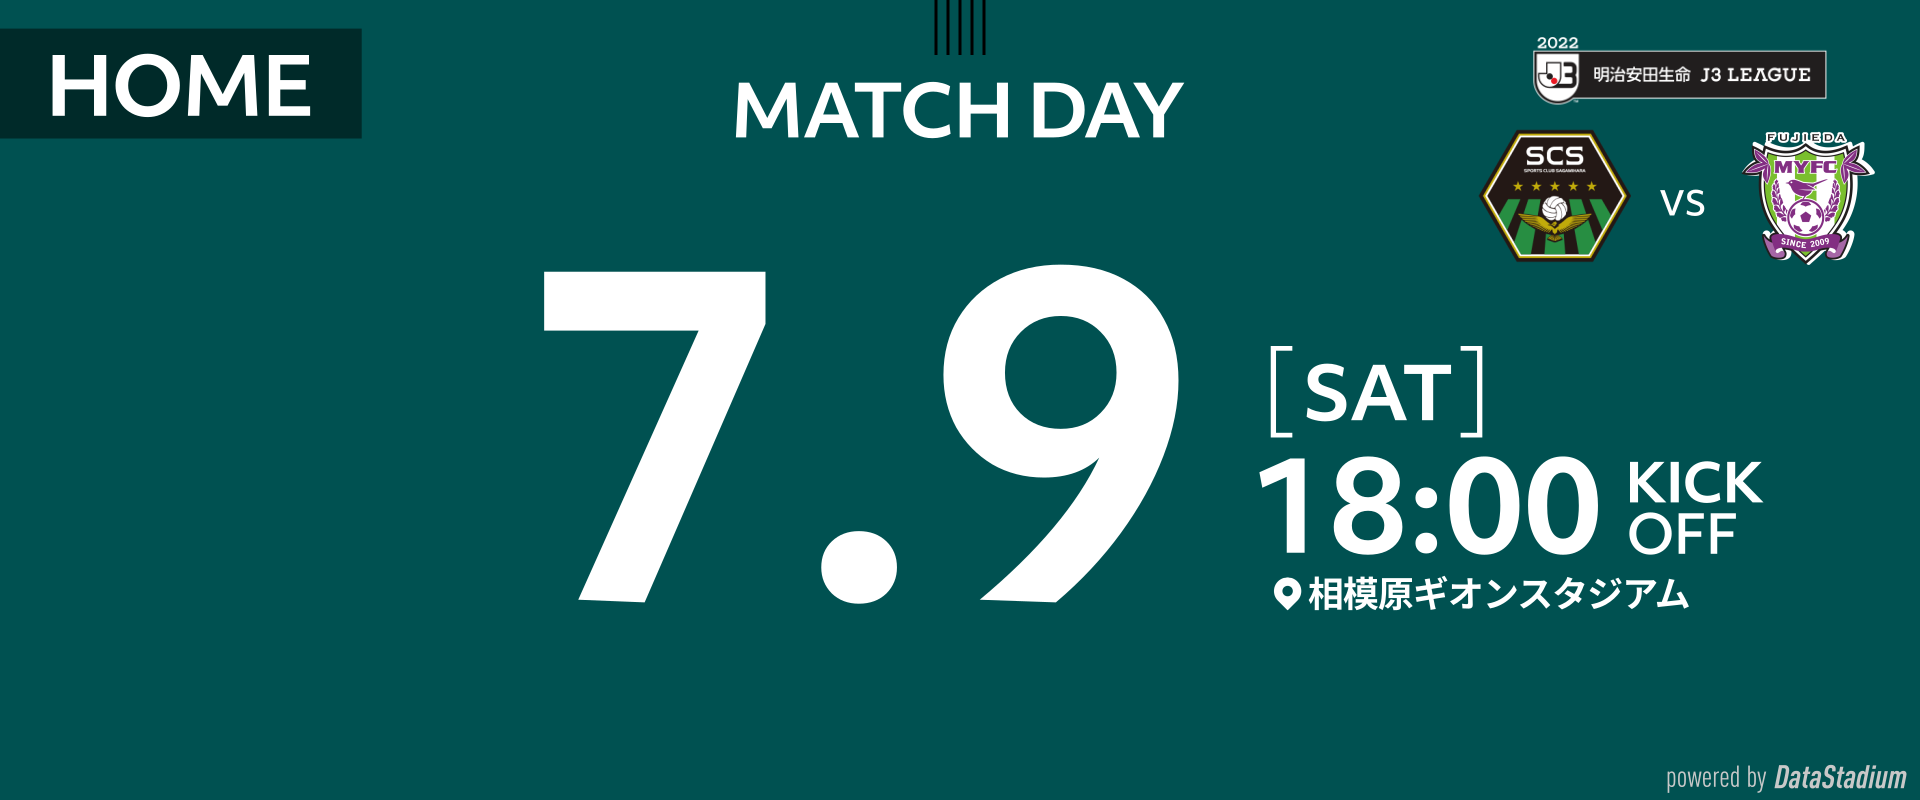 0709_matchday_1920_800.png